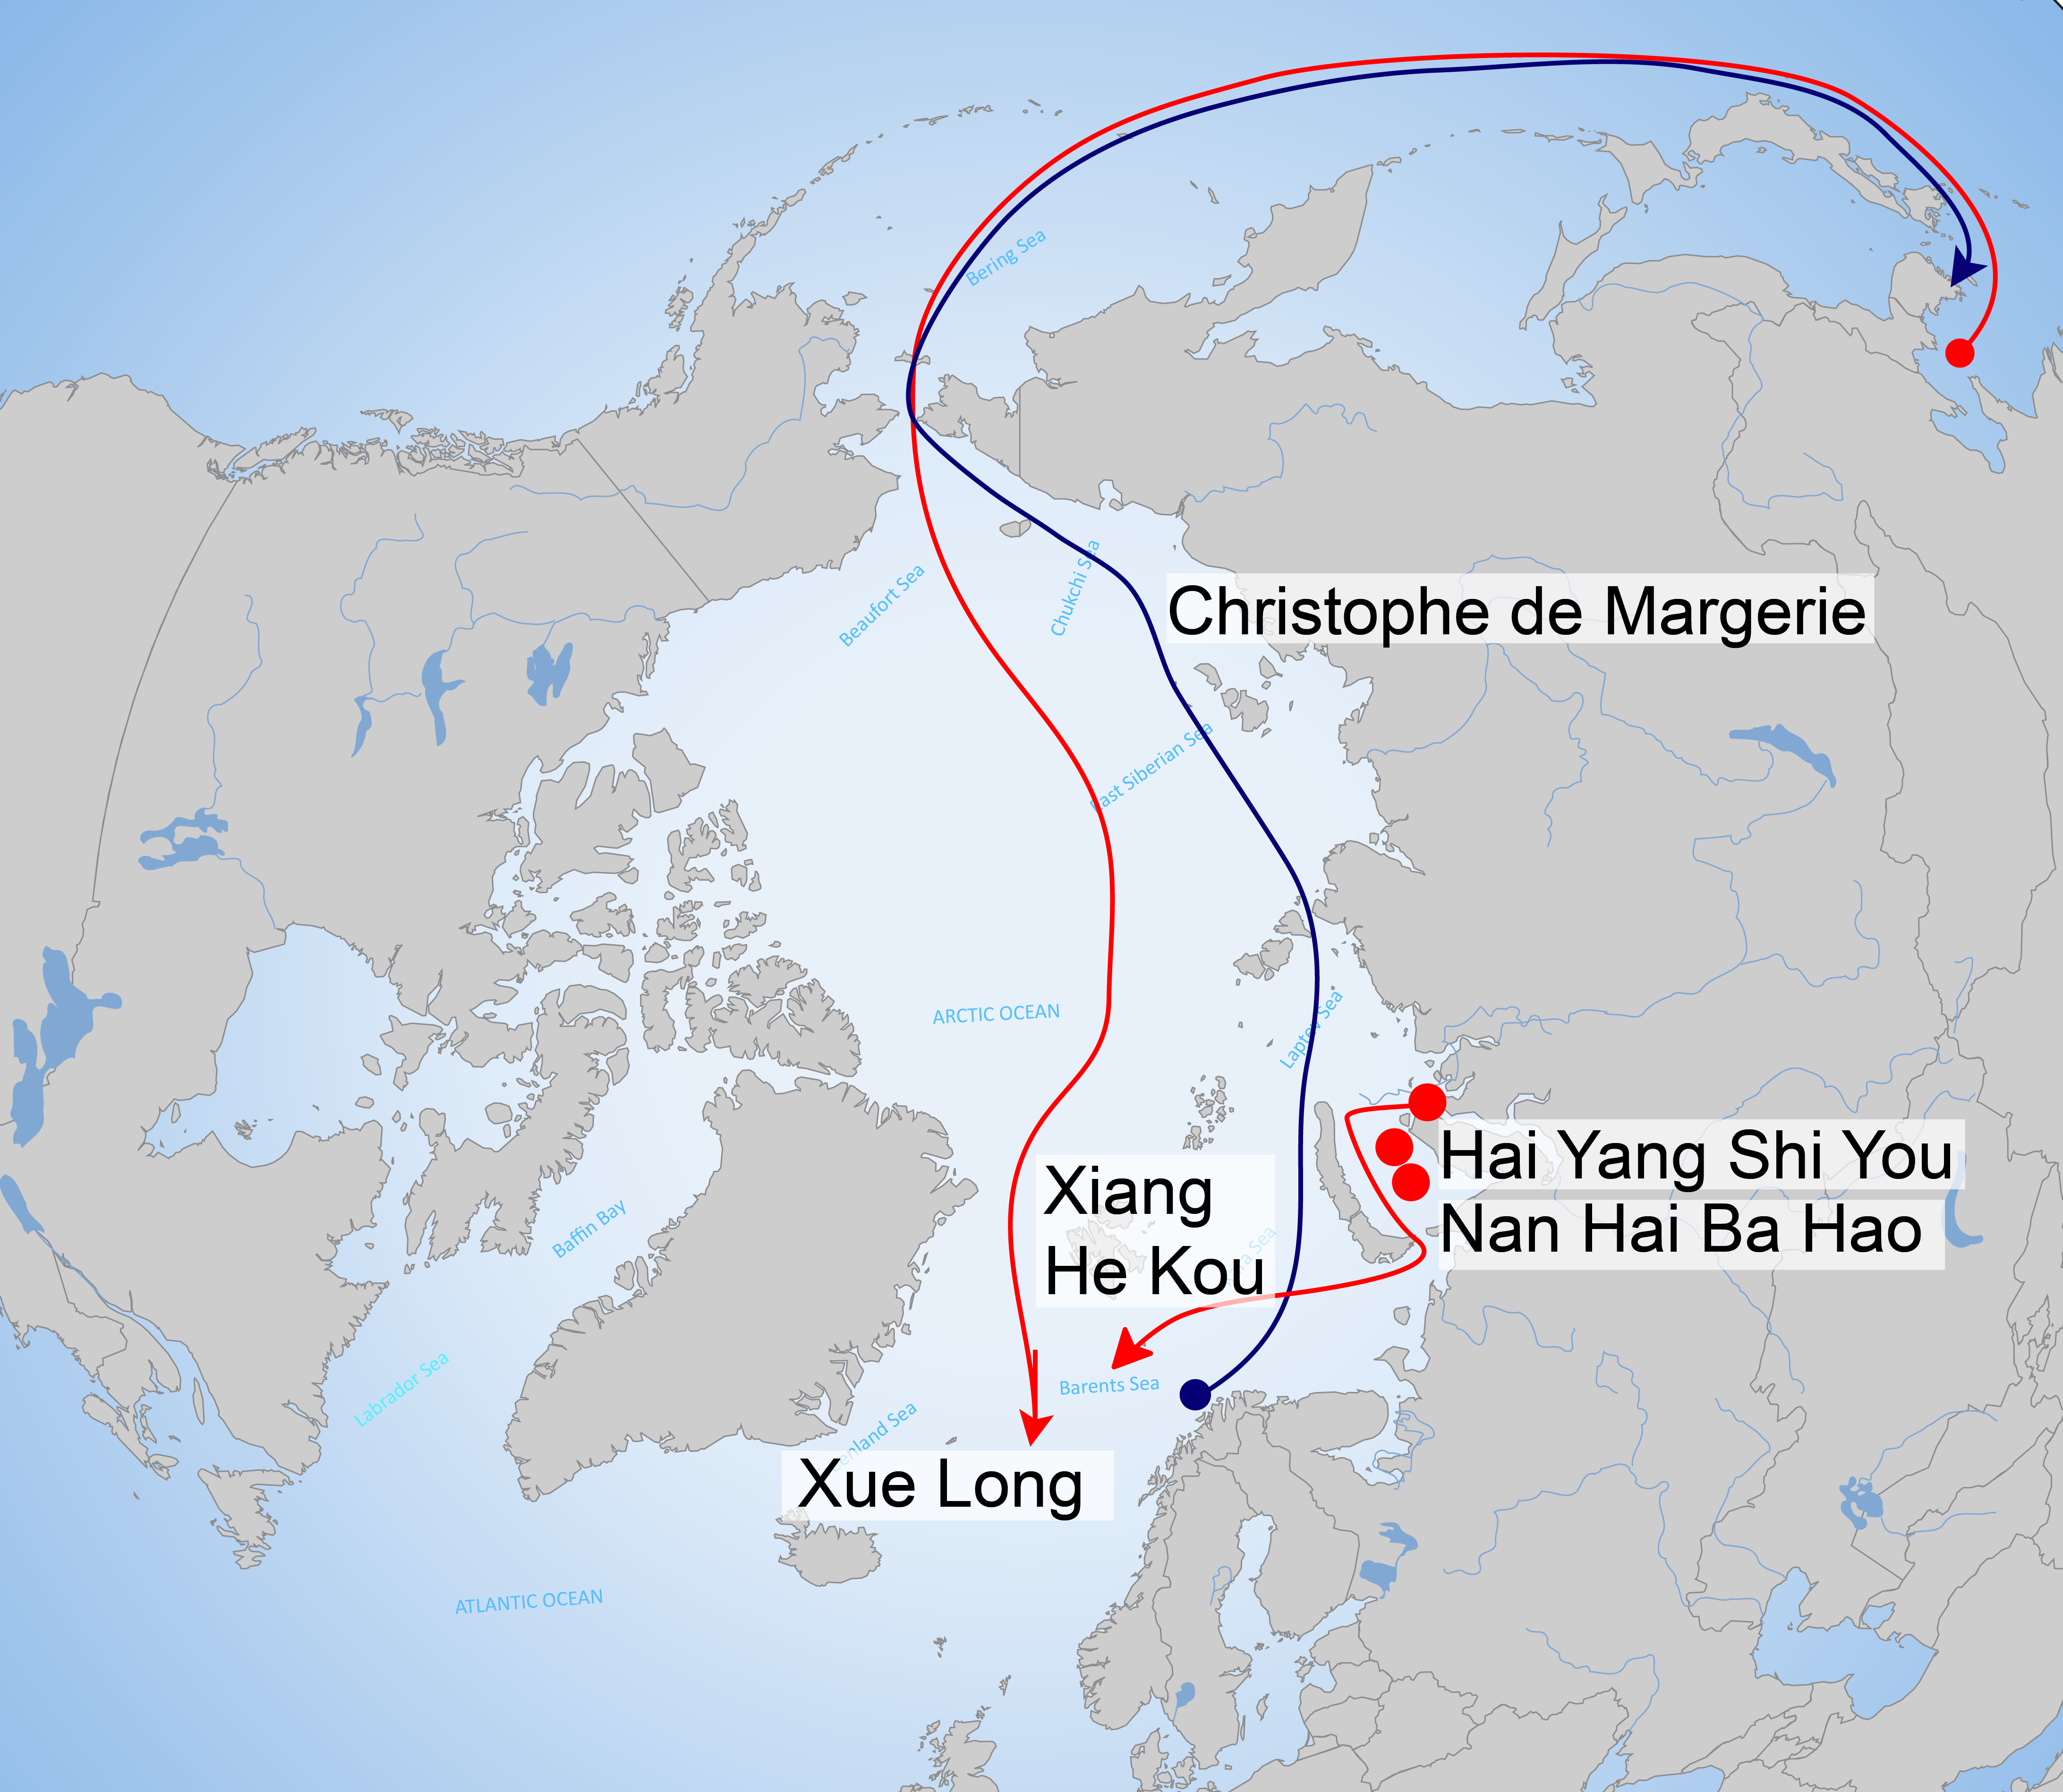 Approximate route or current location of four Chinese vessels and the Christophe de Margerie (Malte Humpert based on NSR Administration, the NSR Information Office, and MarineTraffic.com)